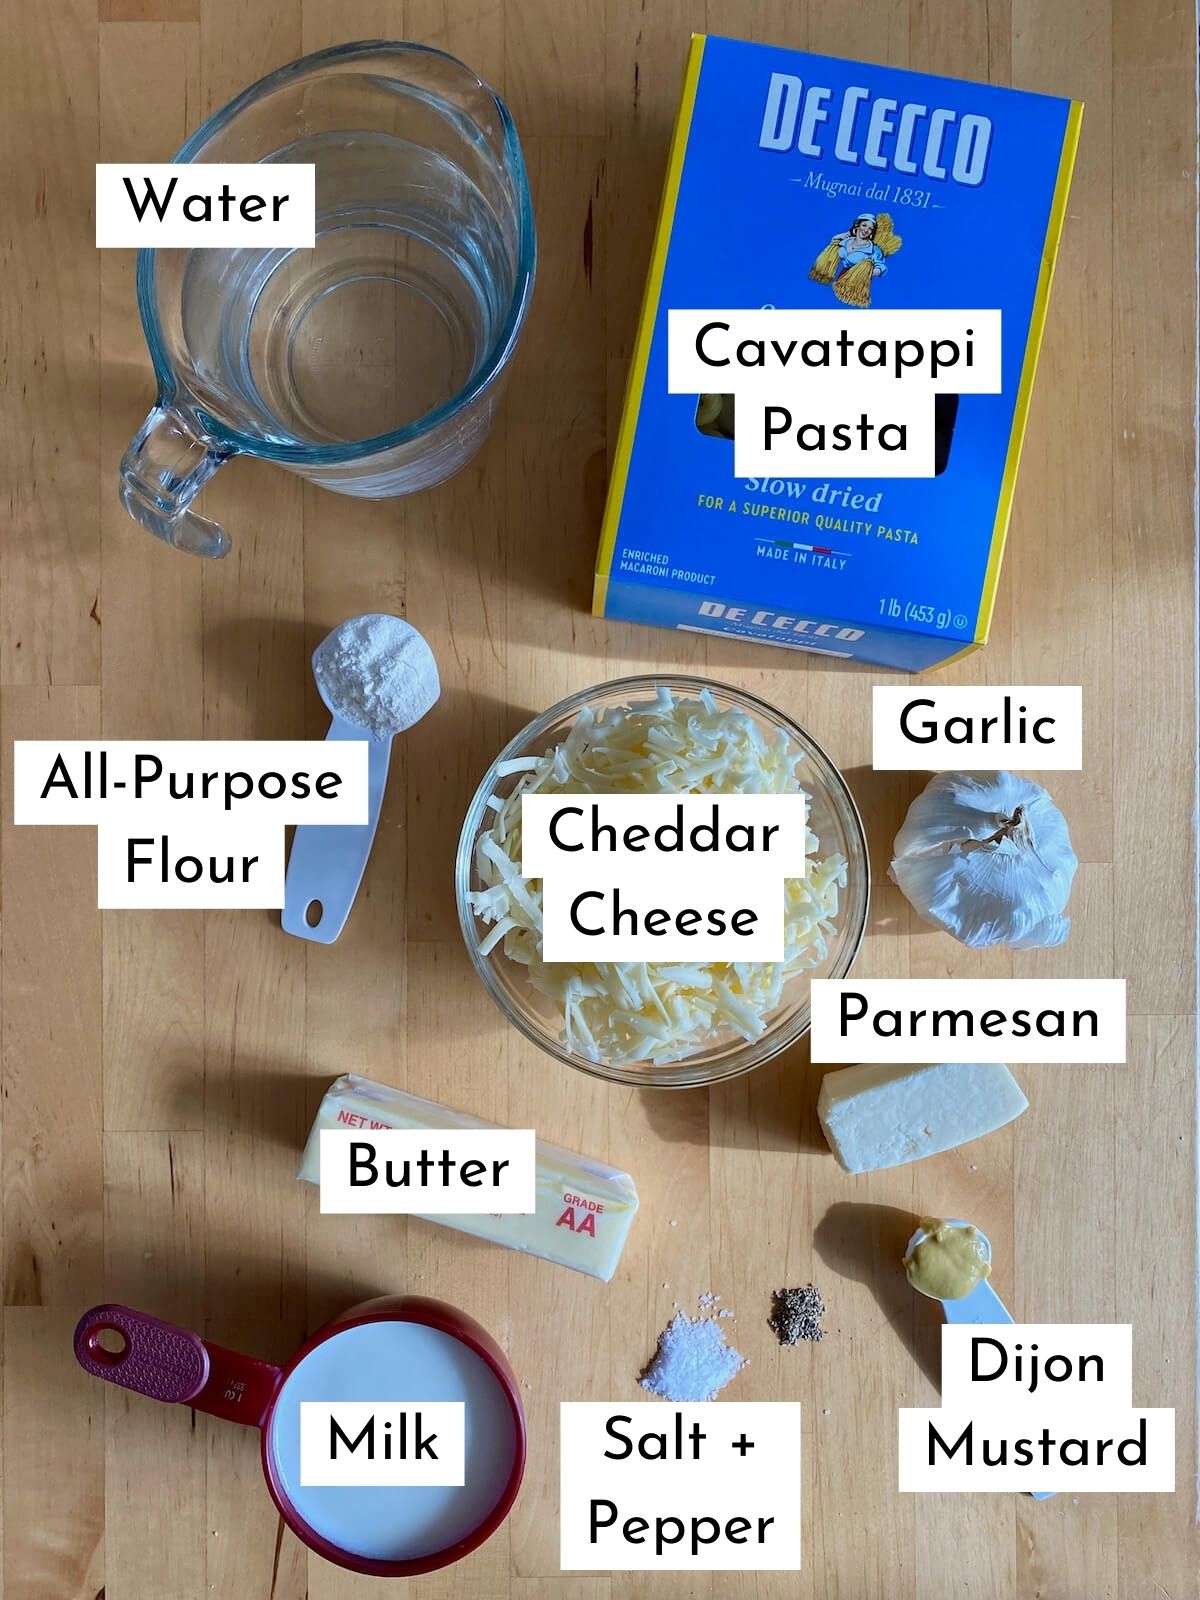 The ingredients to make dutch oven mac and cheese. The ingredients are labeled with text. They include water,  cavatappi pasta, all-purpose flour, cheddar cheese, garlic, butter, parmesan cheese, milk, salt, pepper, and dijon mustard.